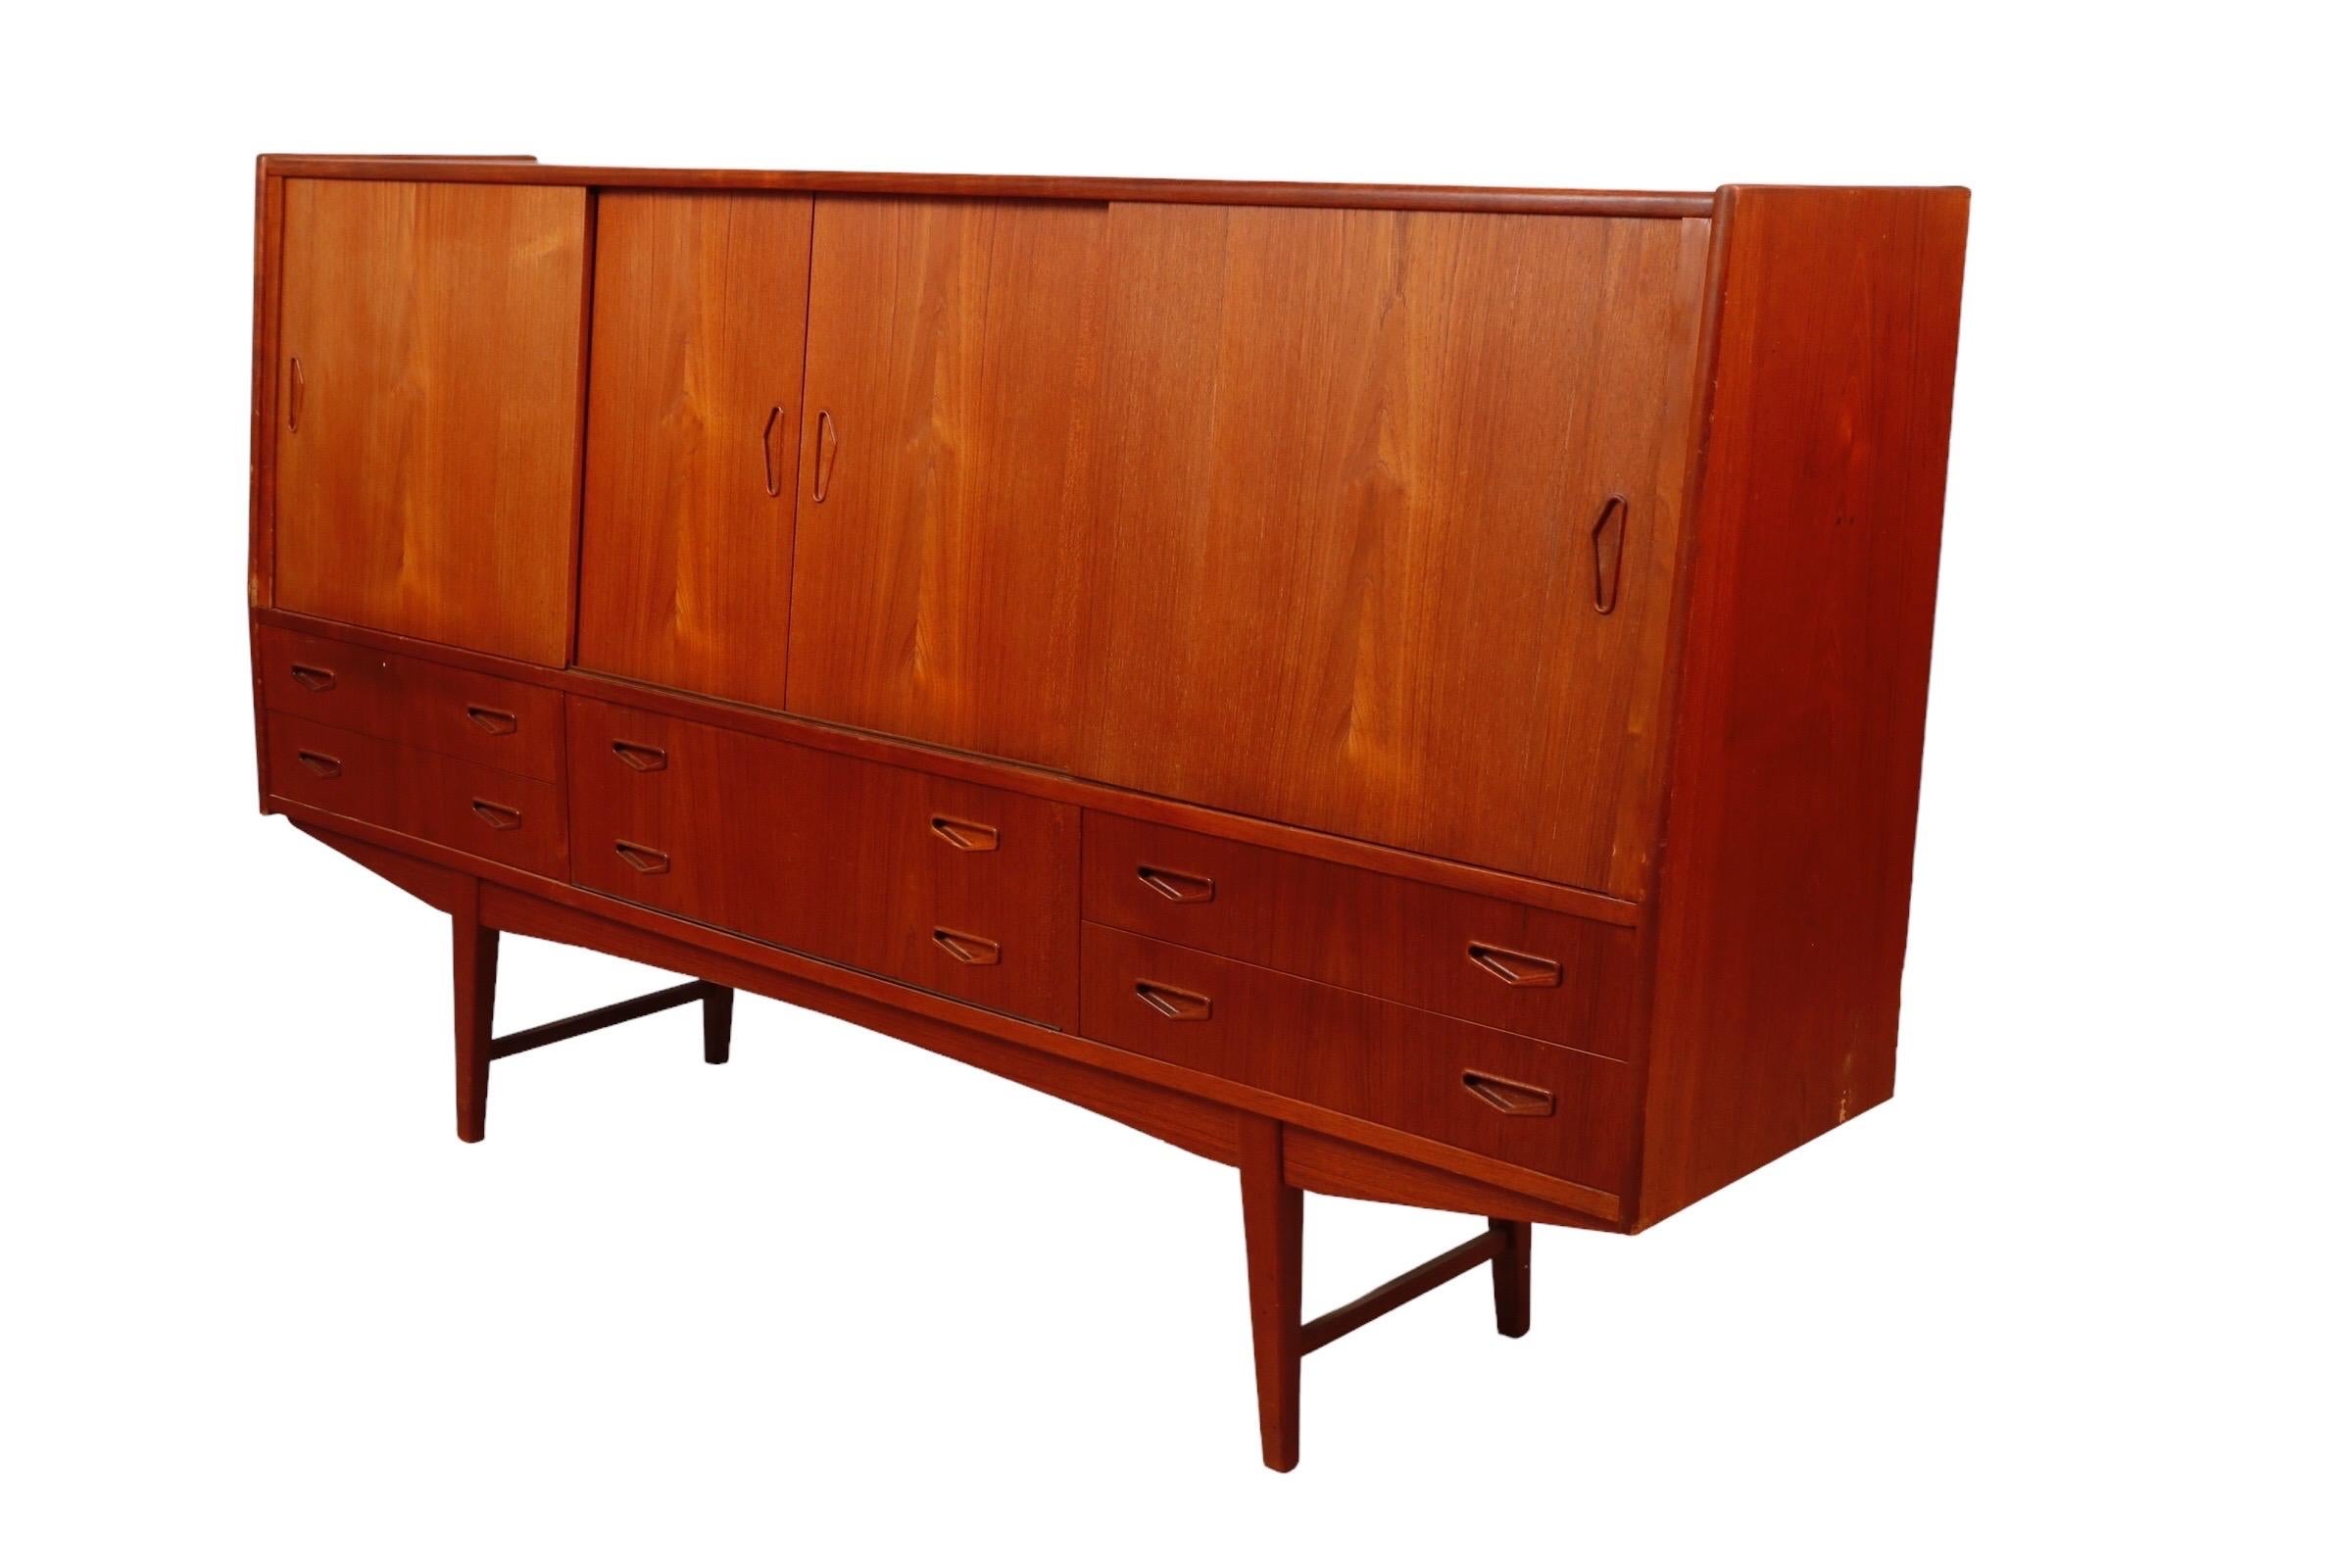 A 1960’s Danish teak bar sideboard. Lots of storage, cabinets flank a mirrored serving area with inlaid details on two central small drawers. Below four drawers and a drop front give the look of six with recessed handles.